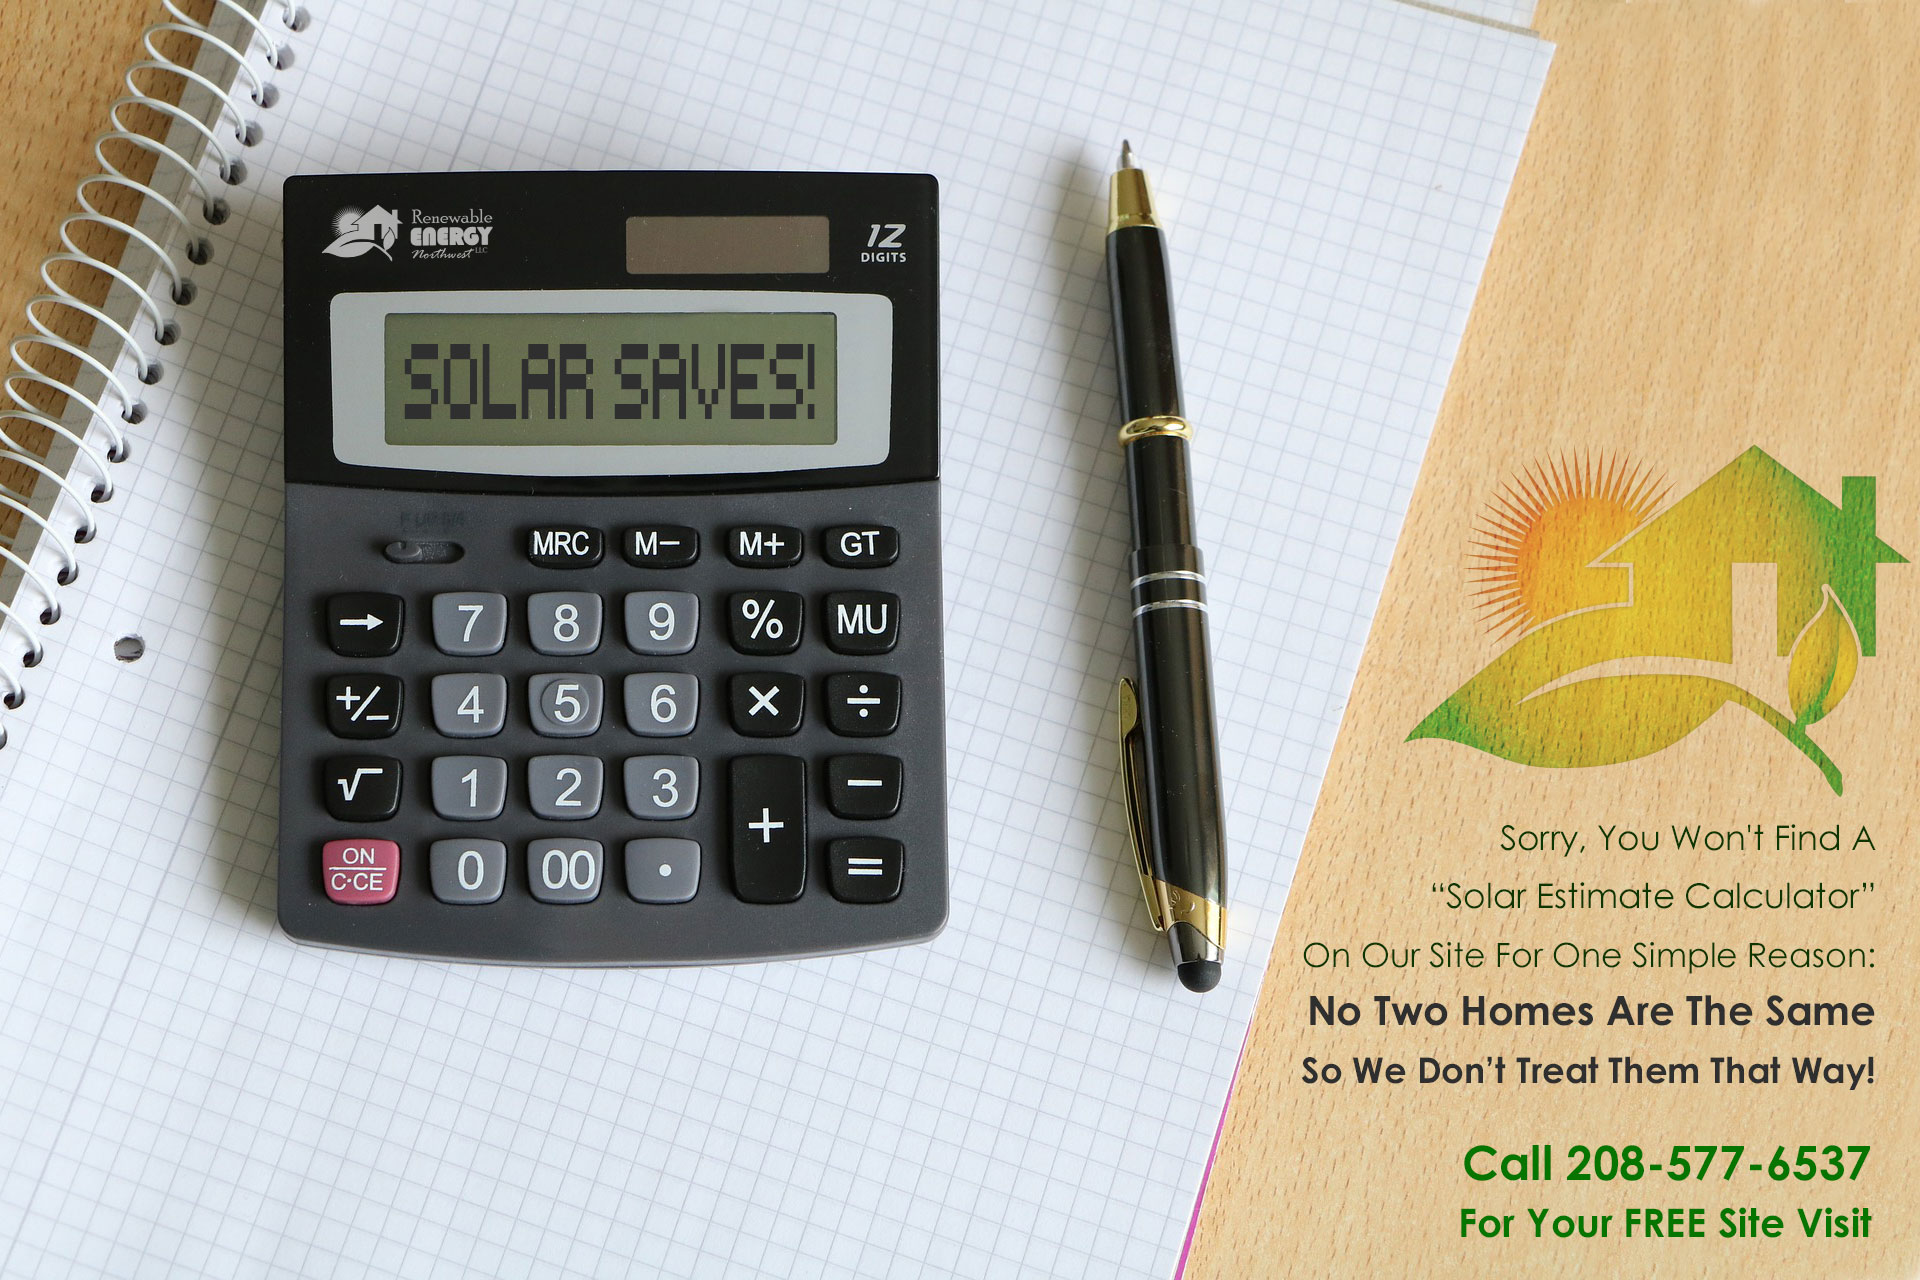 You Won’t Find A Solar Calculator Here!